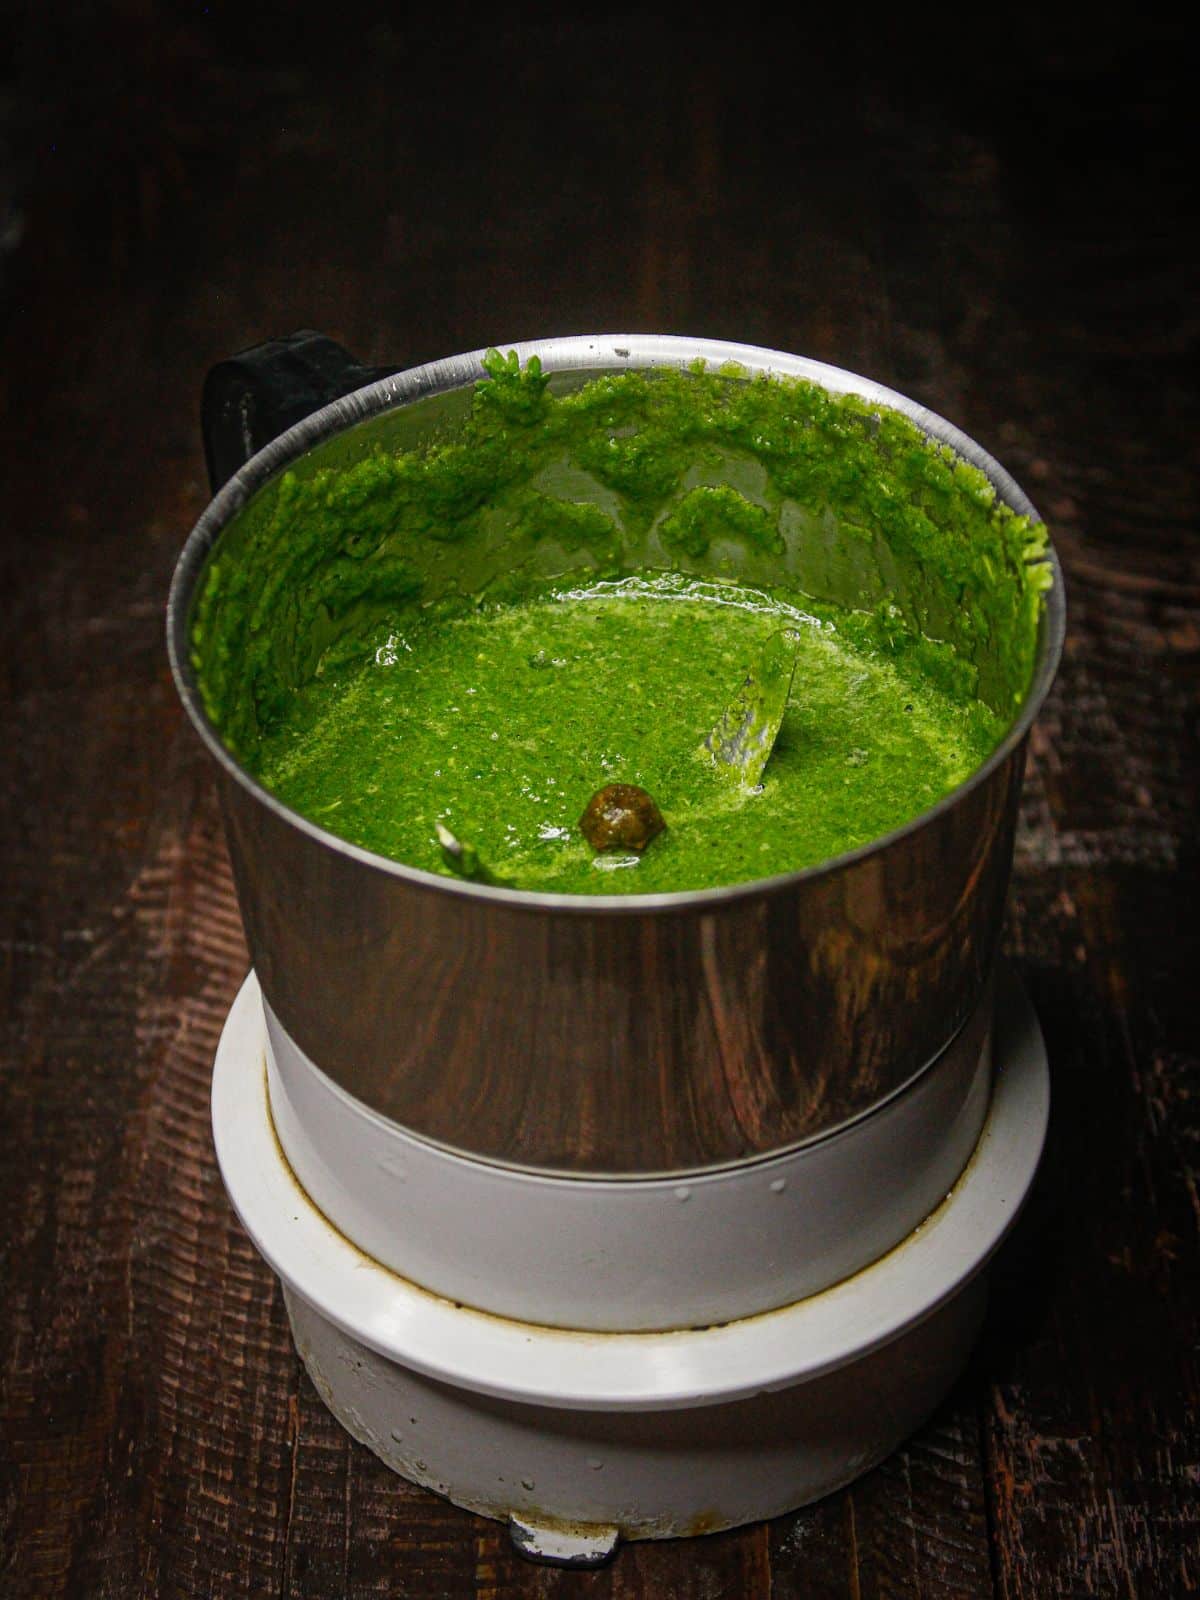 Blend everything from the blender into the semi liquid chutney 